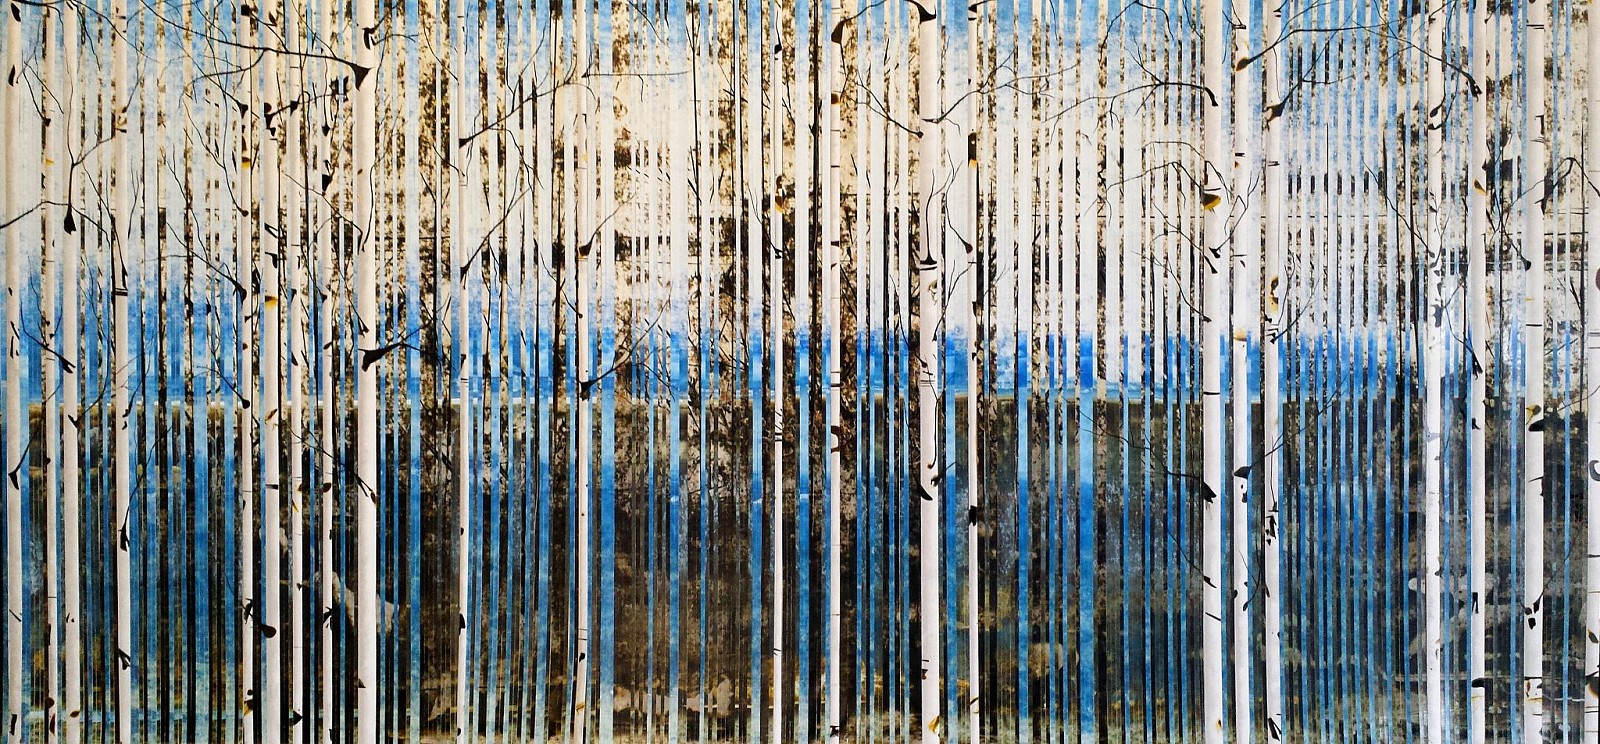 Anastasia Kimmett, Bare Aspens in Cobalt and Sepia
Oil Pastel, Acrylic Ink on Paper Mounted on Panel, 21 x 45 in.
5493
&bull;